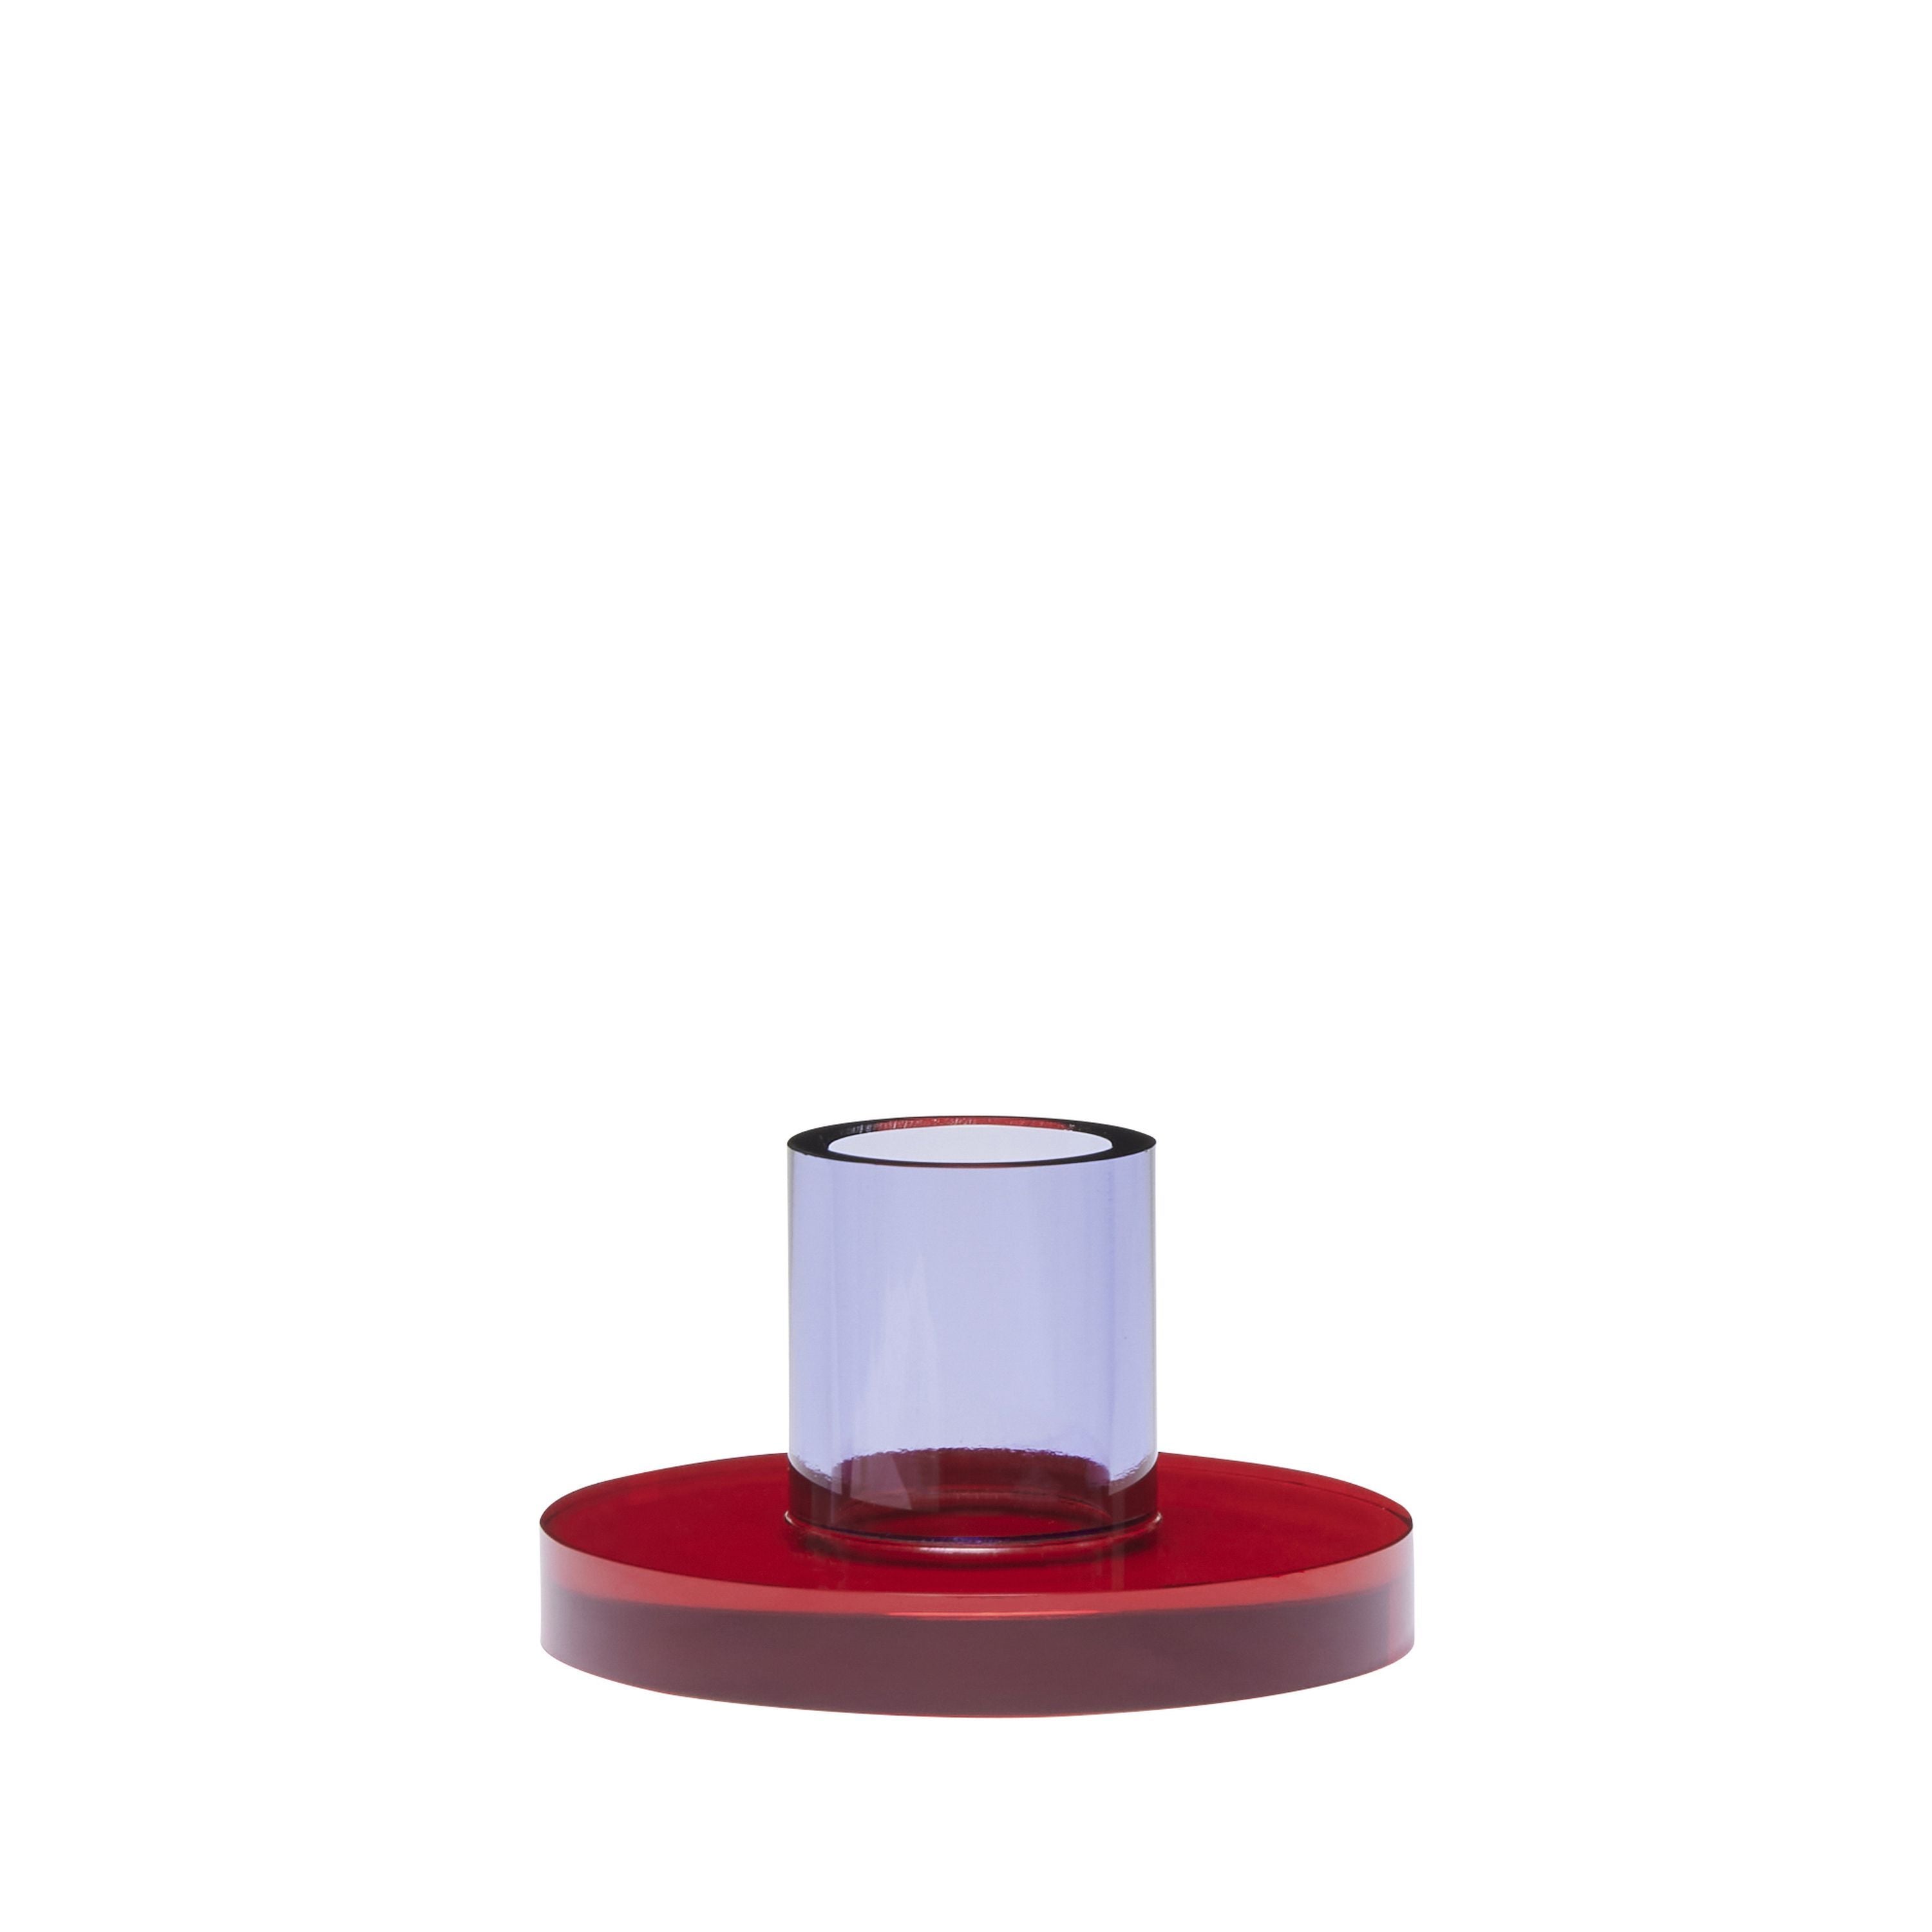 Hübsch Astra Bandle Holder Small, rouge / Violet